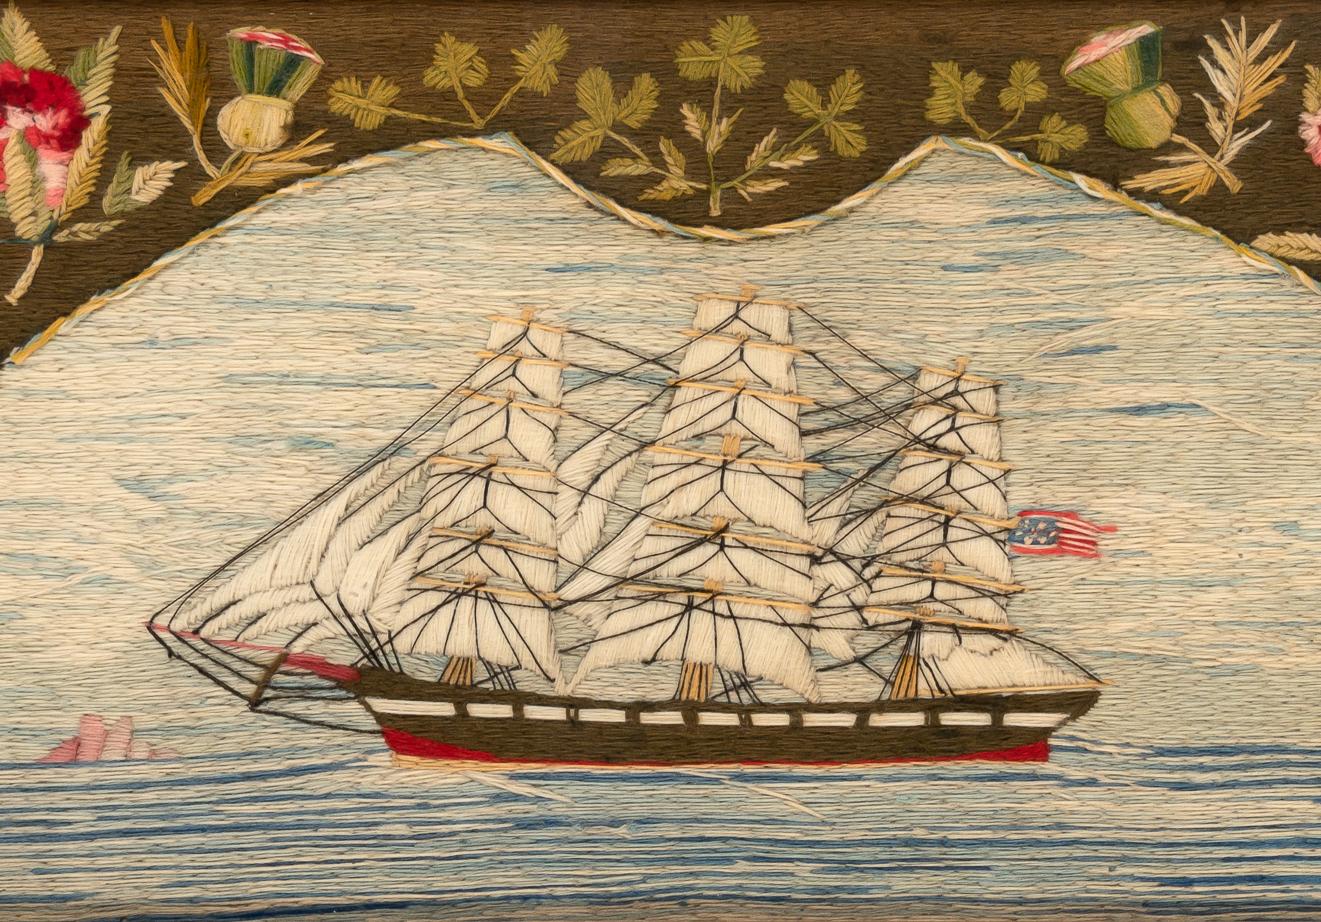 English Sailor's Woolwork of an American Ship Under Full Sail, Circa 1875